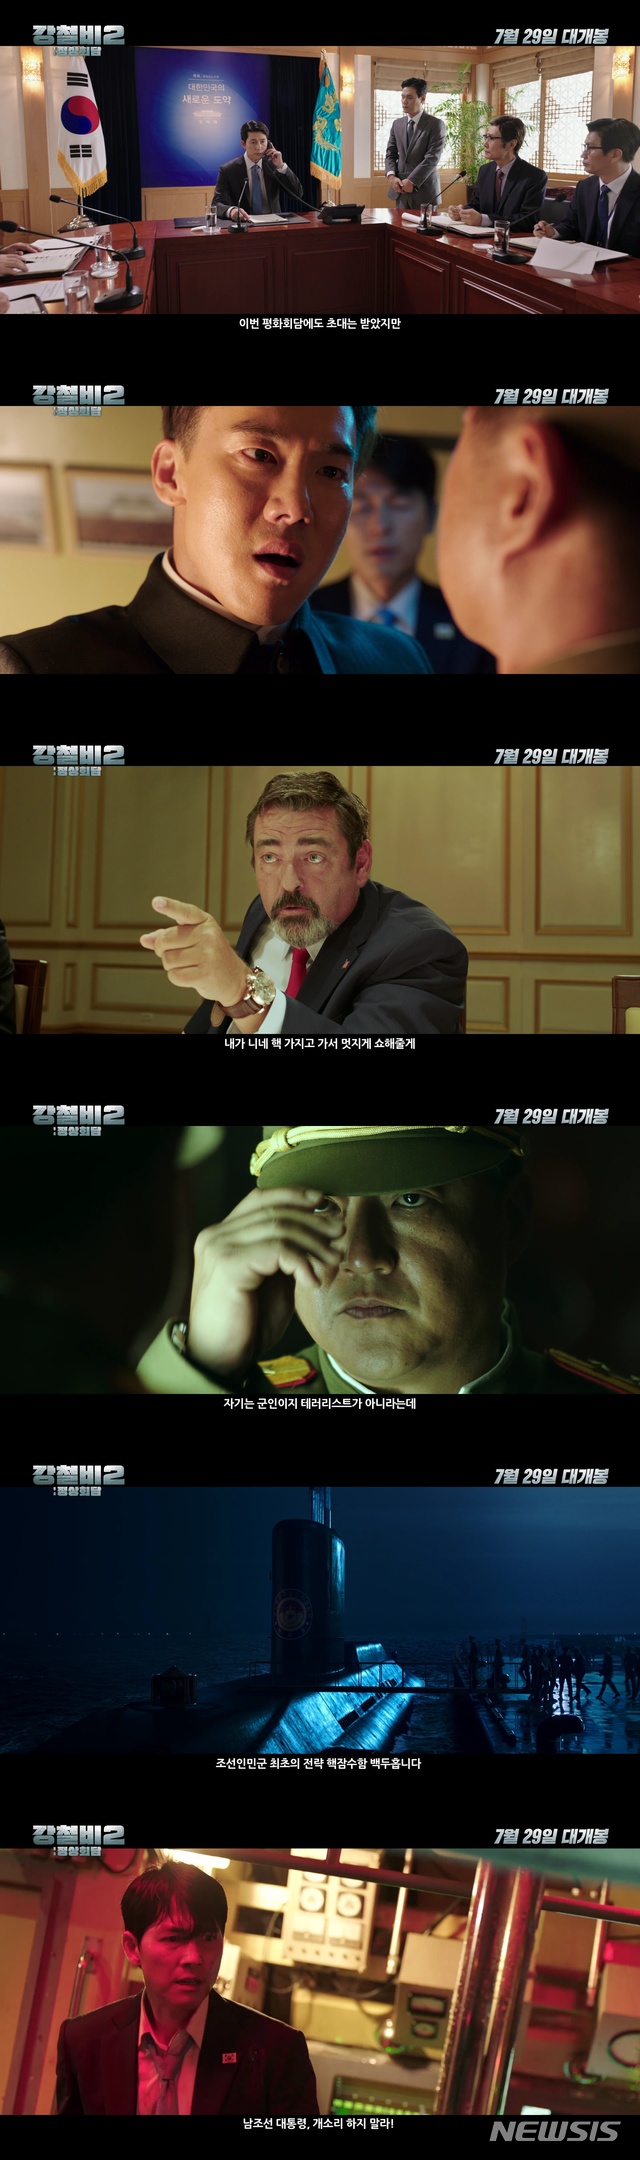 According to distributor Lotte Entertainment on the 2nd, Steel Rain 2: Summit will be released on the 29th and the main trailer will be released for the first time.Steel Rain 2: Summit is a film depicting the situation of Danger just before the war that takes place after the three leaders were kidnapped by the nuclear submarines of the North in a coup détat of the North, between the South and the North and the US Summit.It is a new film directed by Woo-seok Yang, who was released in 2017.The main trailer, which was released, contains a submarine action full of excitement in the sea of ​​the Cold War and an inseparable tension.The trailer begins with the appearance of President South Korea (Jung Woo-sung), North Korean chairman (Yoo Yeon-Seok), and United States of America (Angus McFadden), who are inspected by the North Korean Peoples Army Chair at Wonsan Airport in North Korea.But unlike President South Koreas desire to coordinate the United States of America and North Korea to conclude a peace agreement with the North, the confrontation between the North and the United States of America shows a clear gap.To President South Korea, who persuades North Korea to cross the bridge that can not be returned and the United States of America summit, Can someone bring me a real ketchup?The United States of America president who answers alumni.Why Not?The North Korean chairman, who insists on smoking as his submarine, is a pleasant chemistry, leading to unexpected comic fun.The daunting appearance of the North Korea escort general (Kwak Do-won), who opposes peace agreements and reform and openings and thinks the path to keeping an alliance with the Bloodline China is patriotic, raises tensions.The escort chief kidnaps the three leaders in the North Korea Nuclear submarines Baekduho through a coup, and United States of America finds out that China is behind it.United States of America, South Korea, and China governments in an emergency that led to the three leaders being hostages.And the appearance of Baekduho, which is entangled with Japanese submarines off Dokdo, adds tension to the fact that the sea of ​​the Cold War is not a problem of the Korean peninsula but a situation that threatens peace in Northeast Asia.Here, scale underwater action such as torpedoes and nuclear submarines raises expectations to show vivid submarine action.South Korea President Jung Woo-sung, who says, Lets look for a way to live together, raises questions about the development of the drama in the Danger situation where nuclear missiles may be launched in North Nuclear submarines Baekdu Lake.Jung Woo-sung and Kwak Do-won and Yoo Yeon-Seok.Woo-Seok Yangs new director